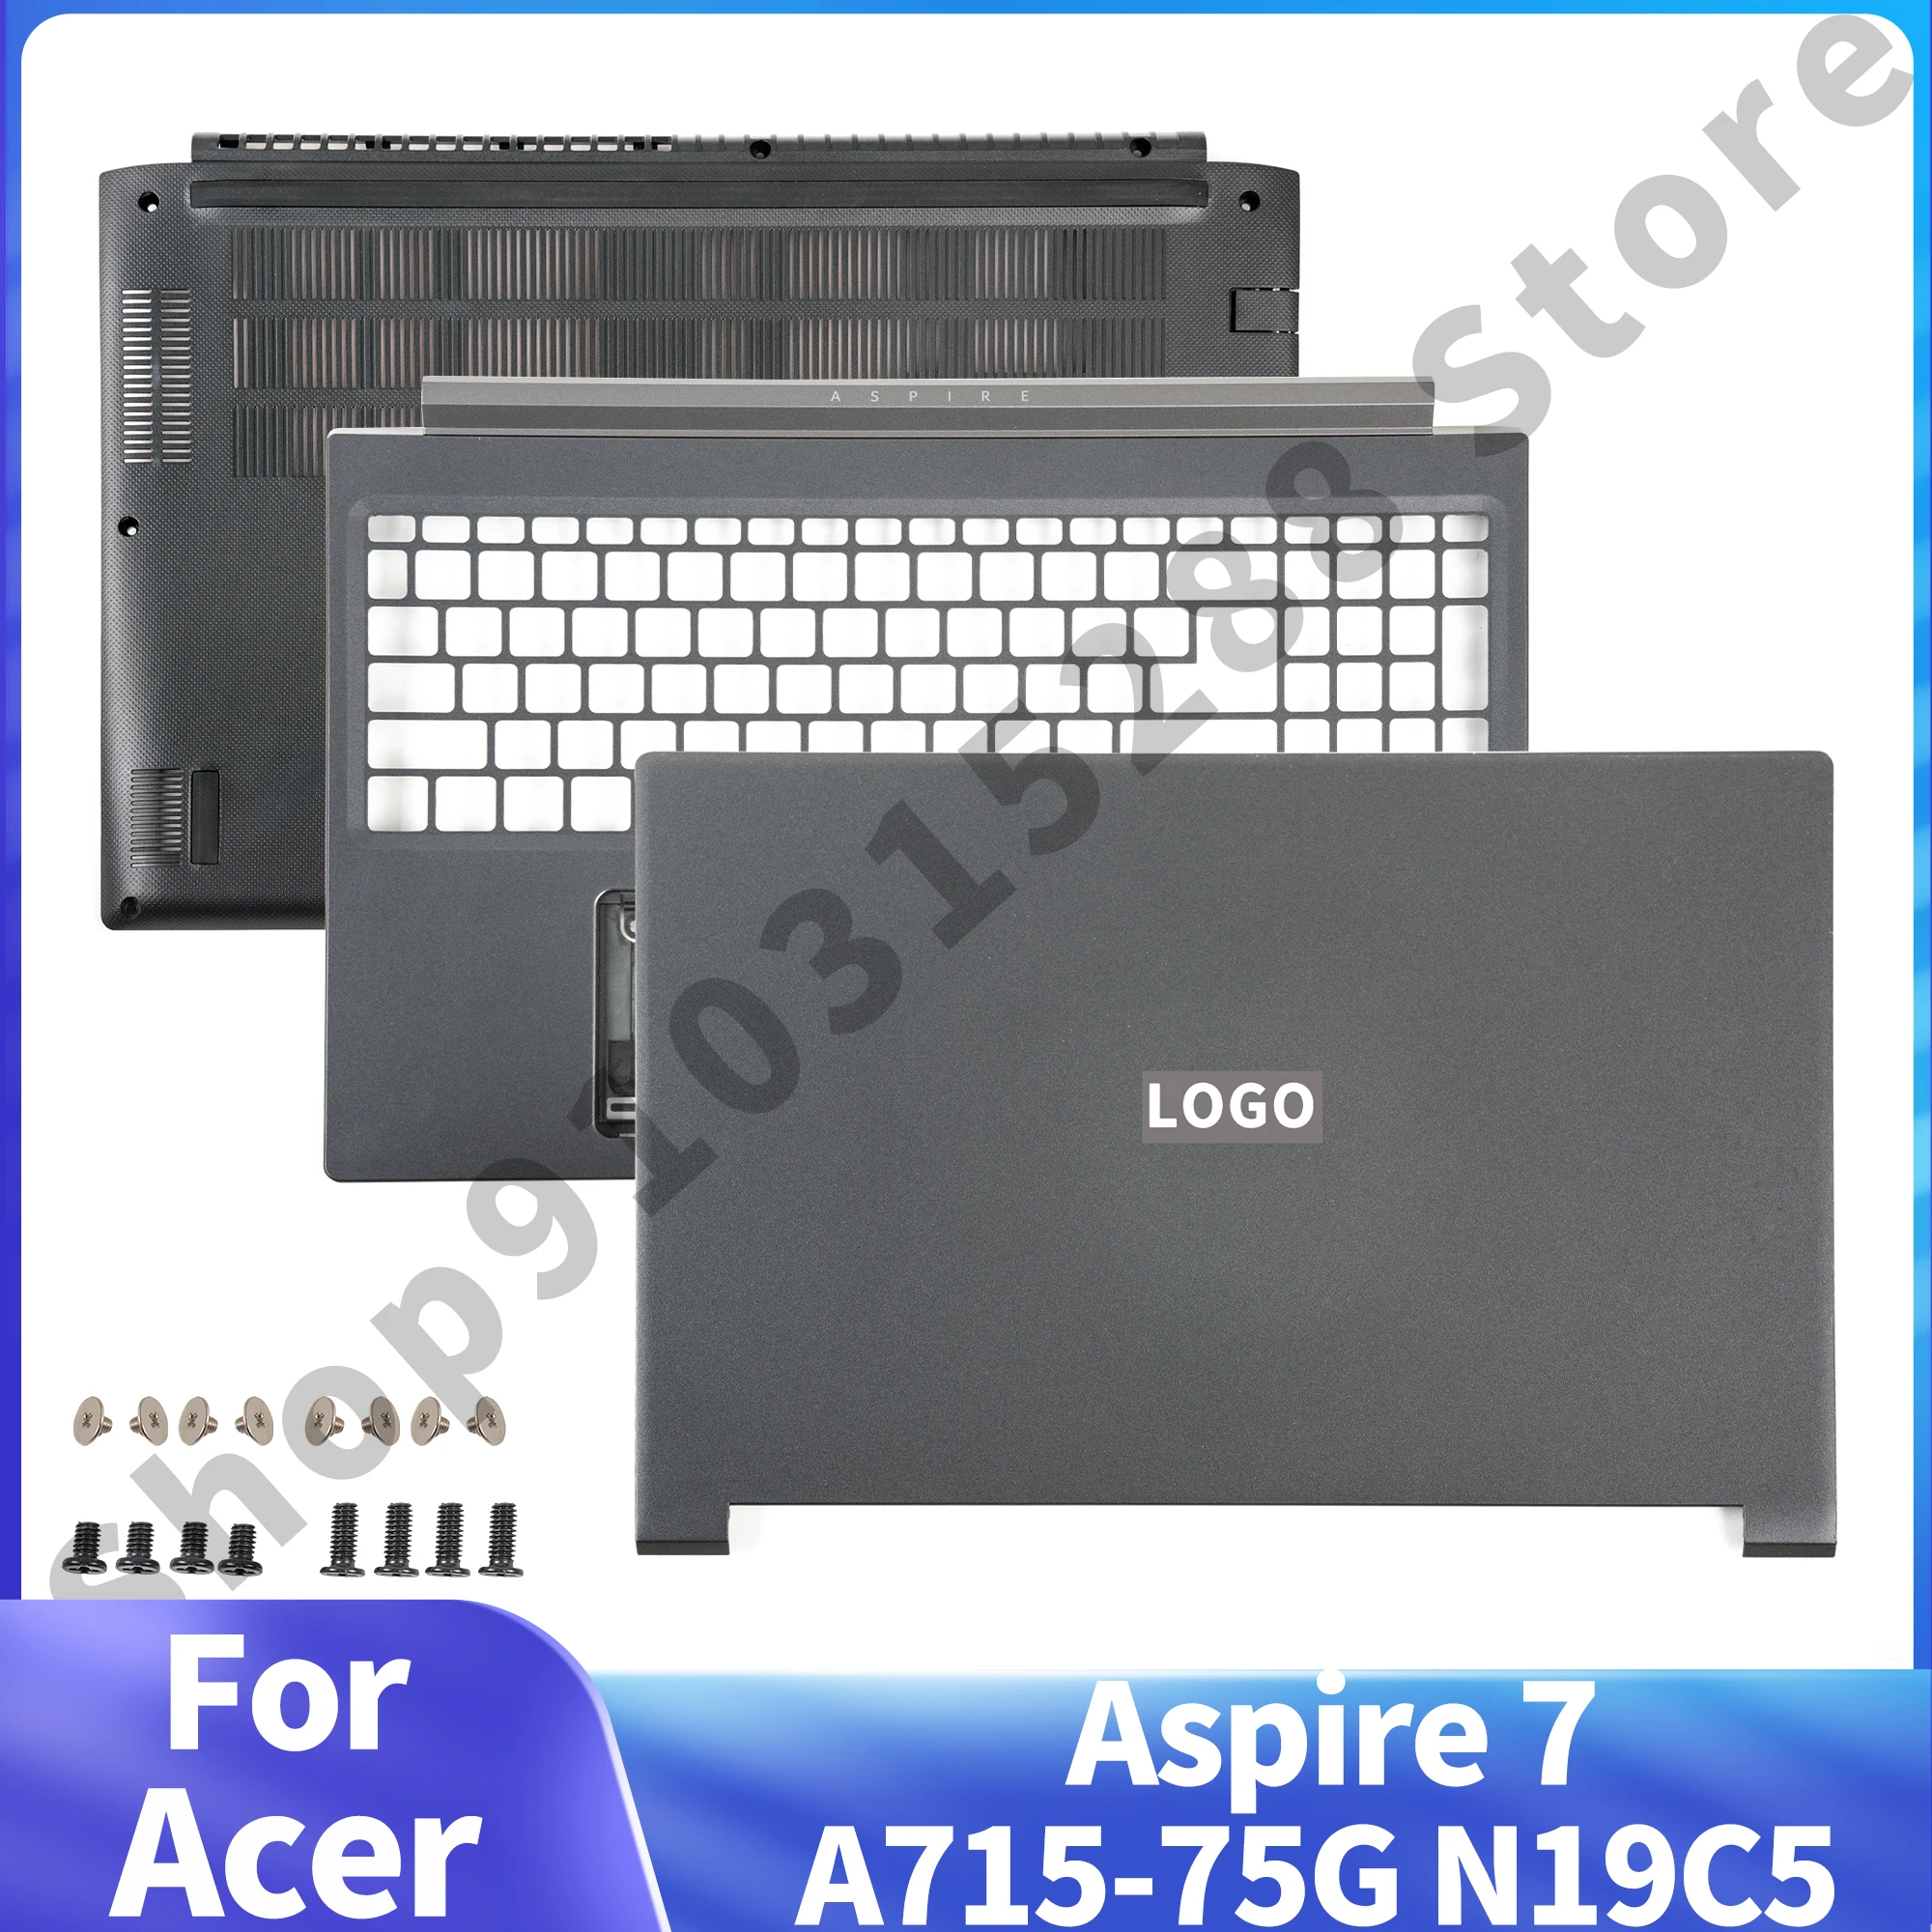 

New Covers For Acer Aspire 7 A715-75G N19C5 Original Palmrest Upper Cover Bottom Case Laptop Replace Parts Screws Maintenance